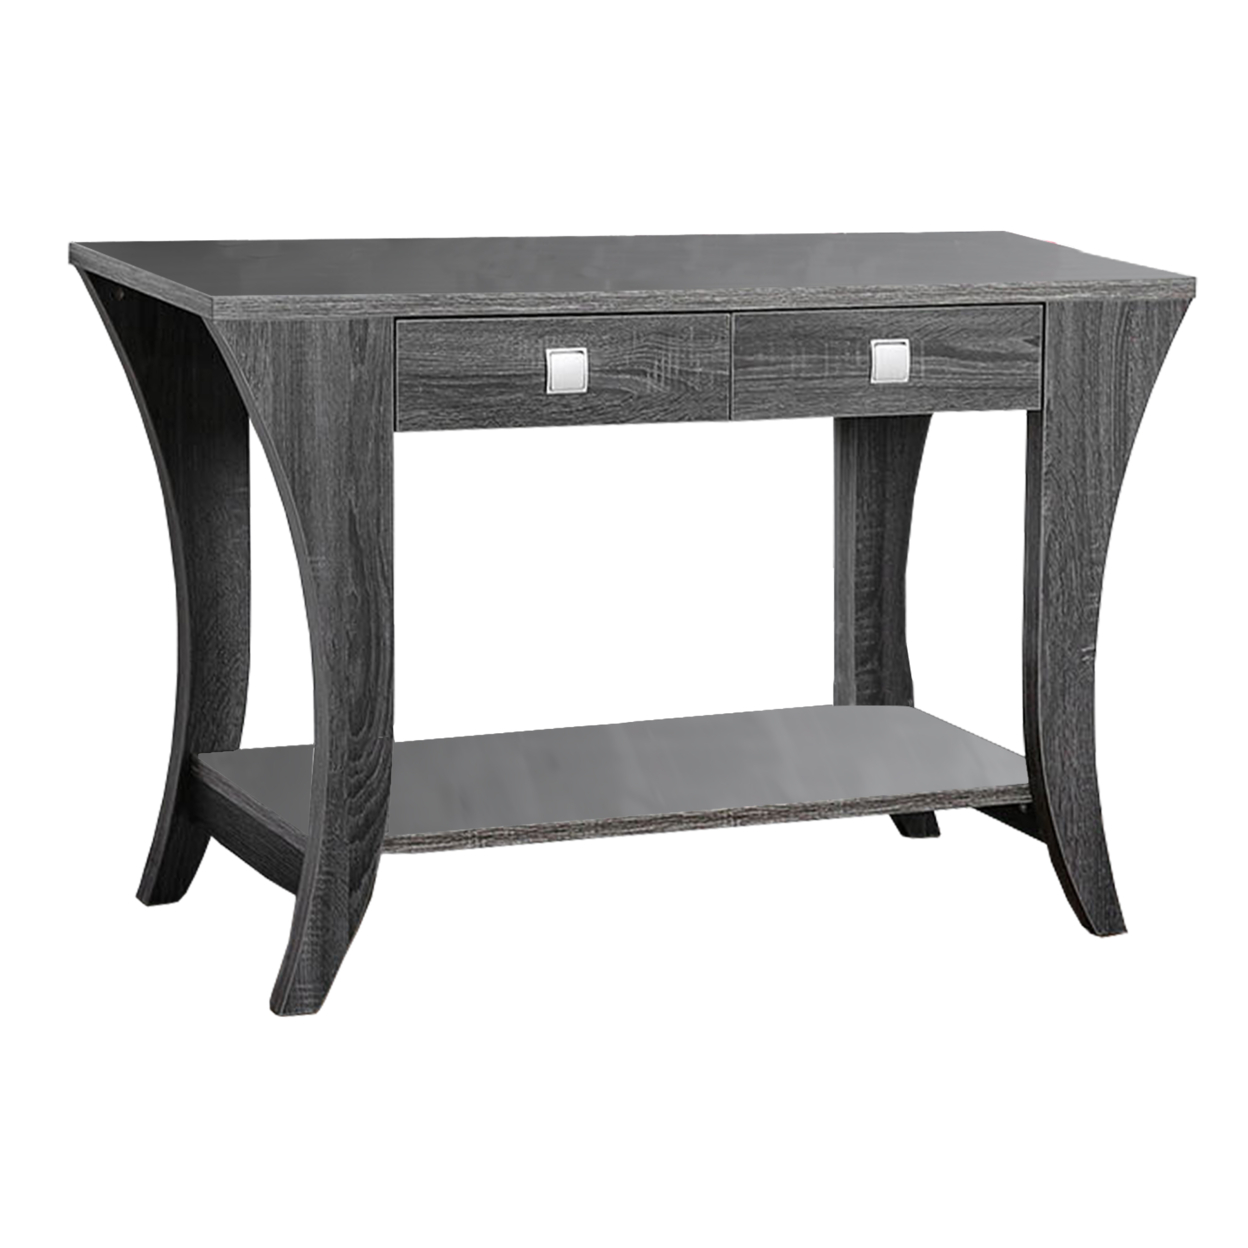 Two Drawers Wooden Sofa Table With Bottom Shelf And Swooping Curled Legs, Gray- Saltoro Sherpi